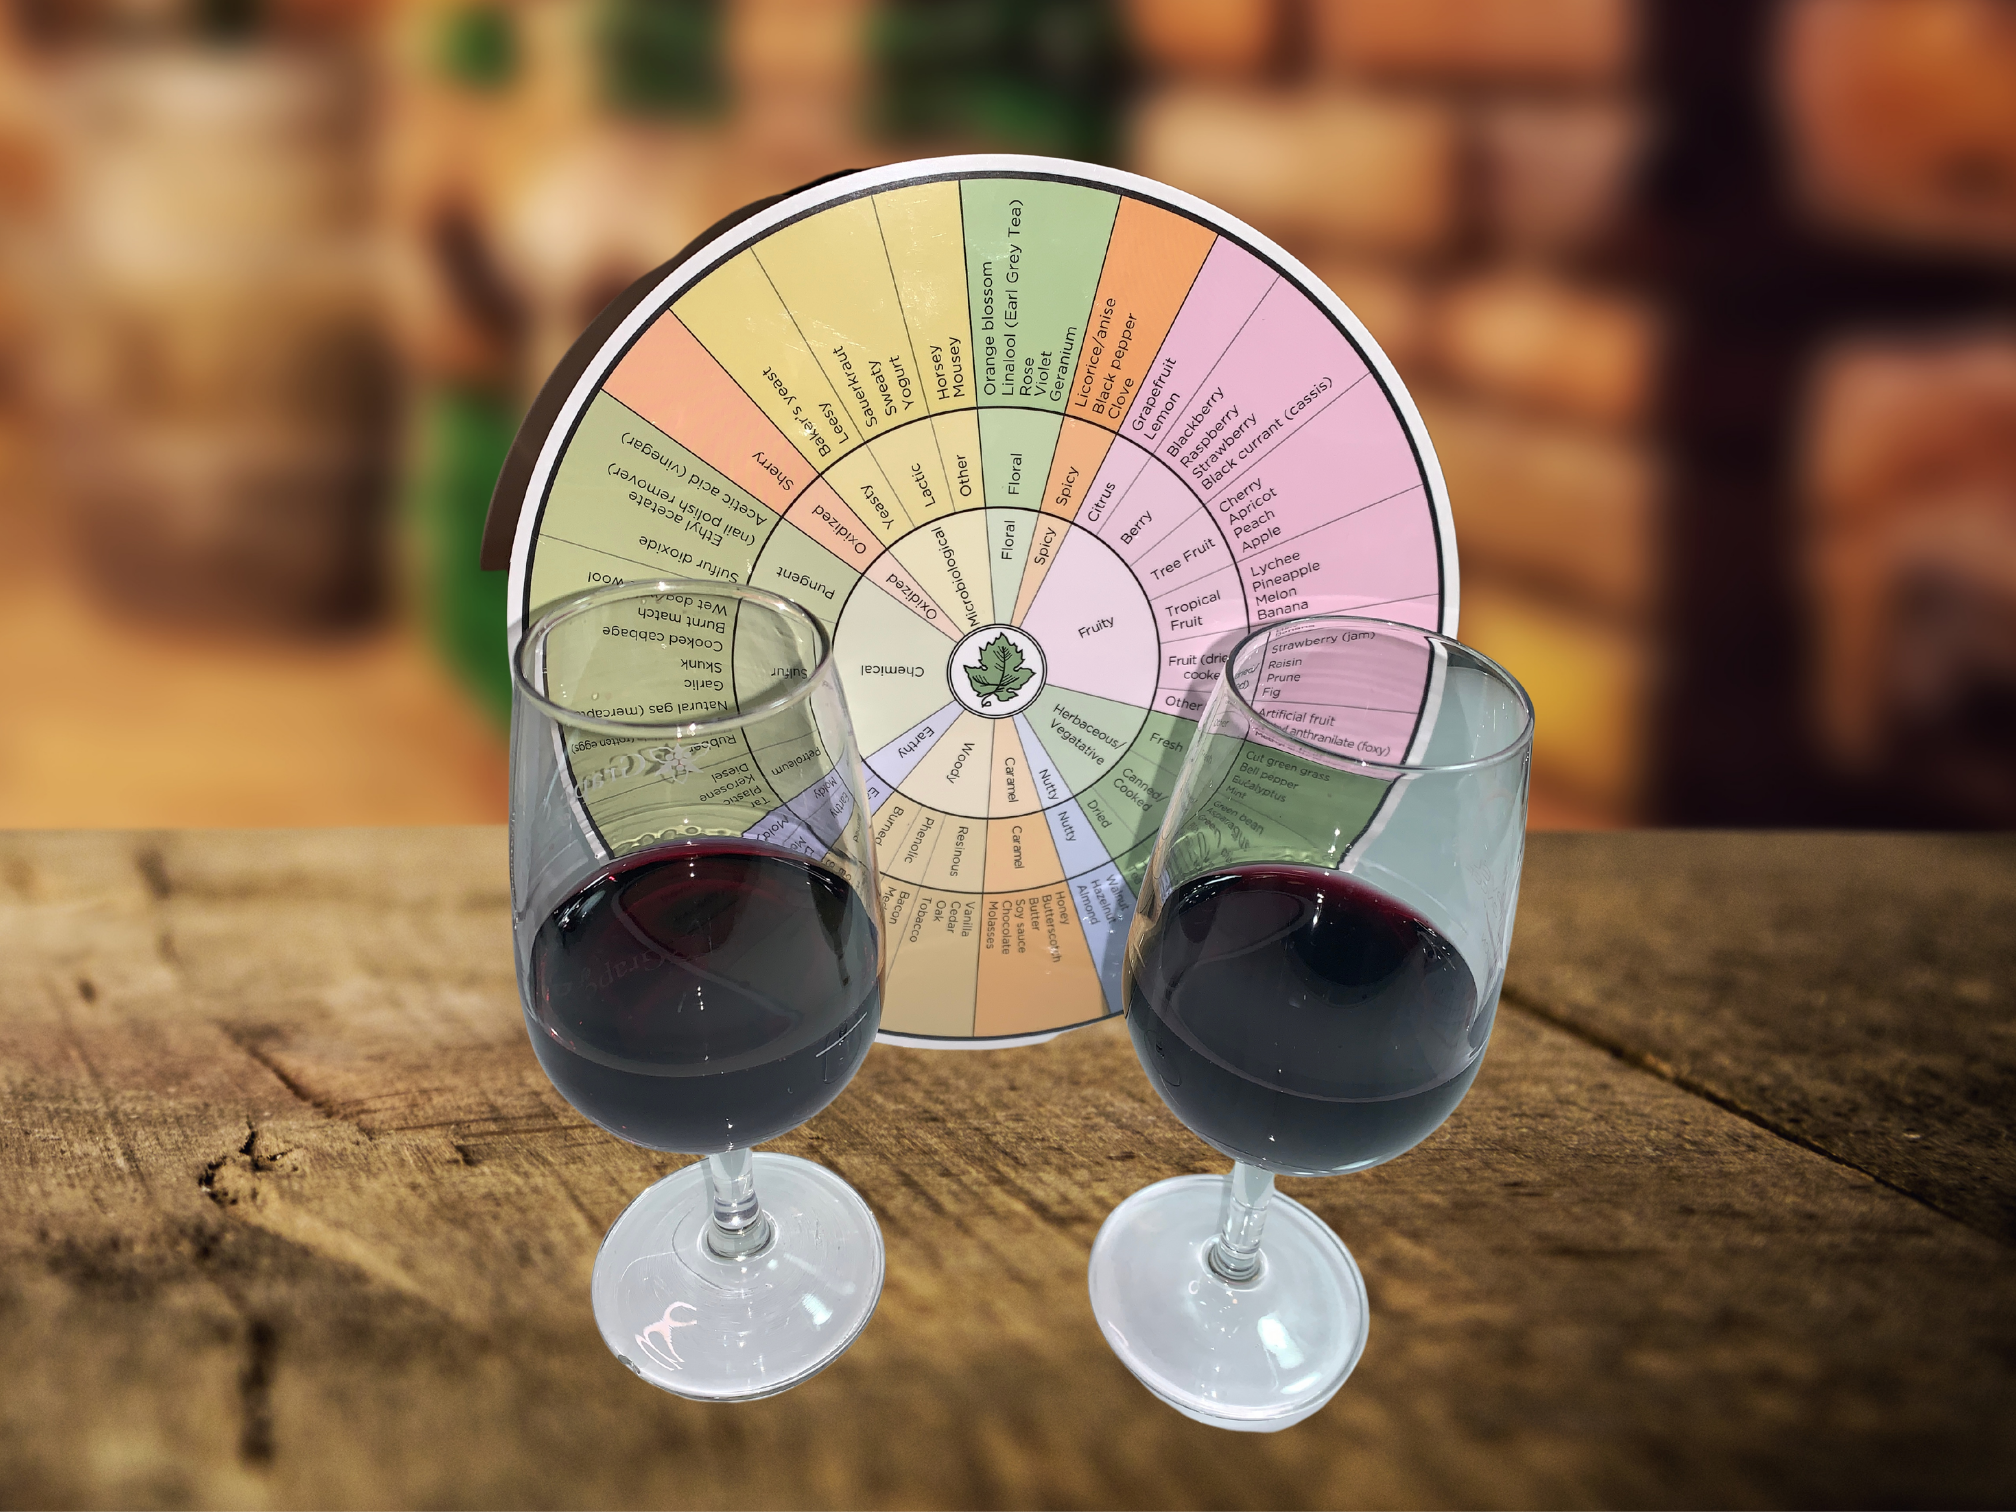 An image showing the wine aroma wheel behind two glasses containing red wine.